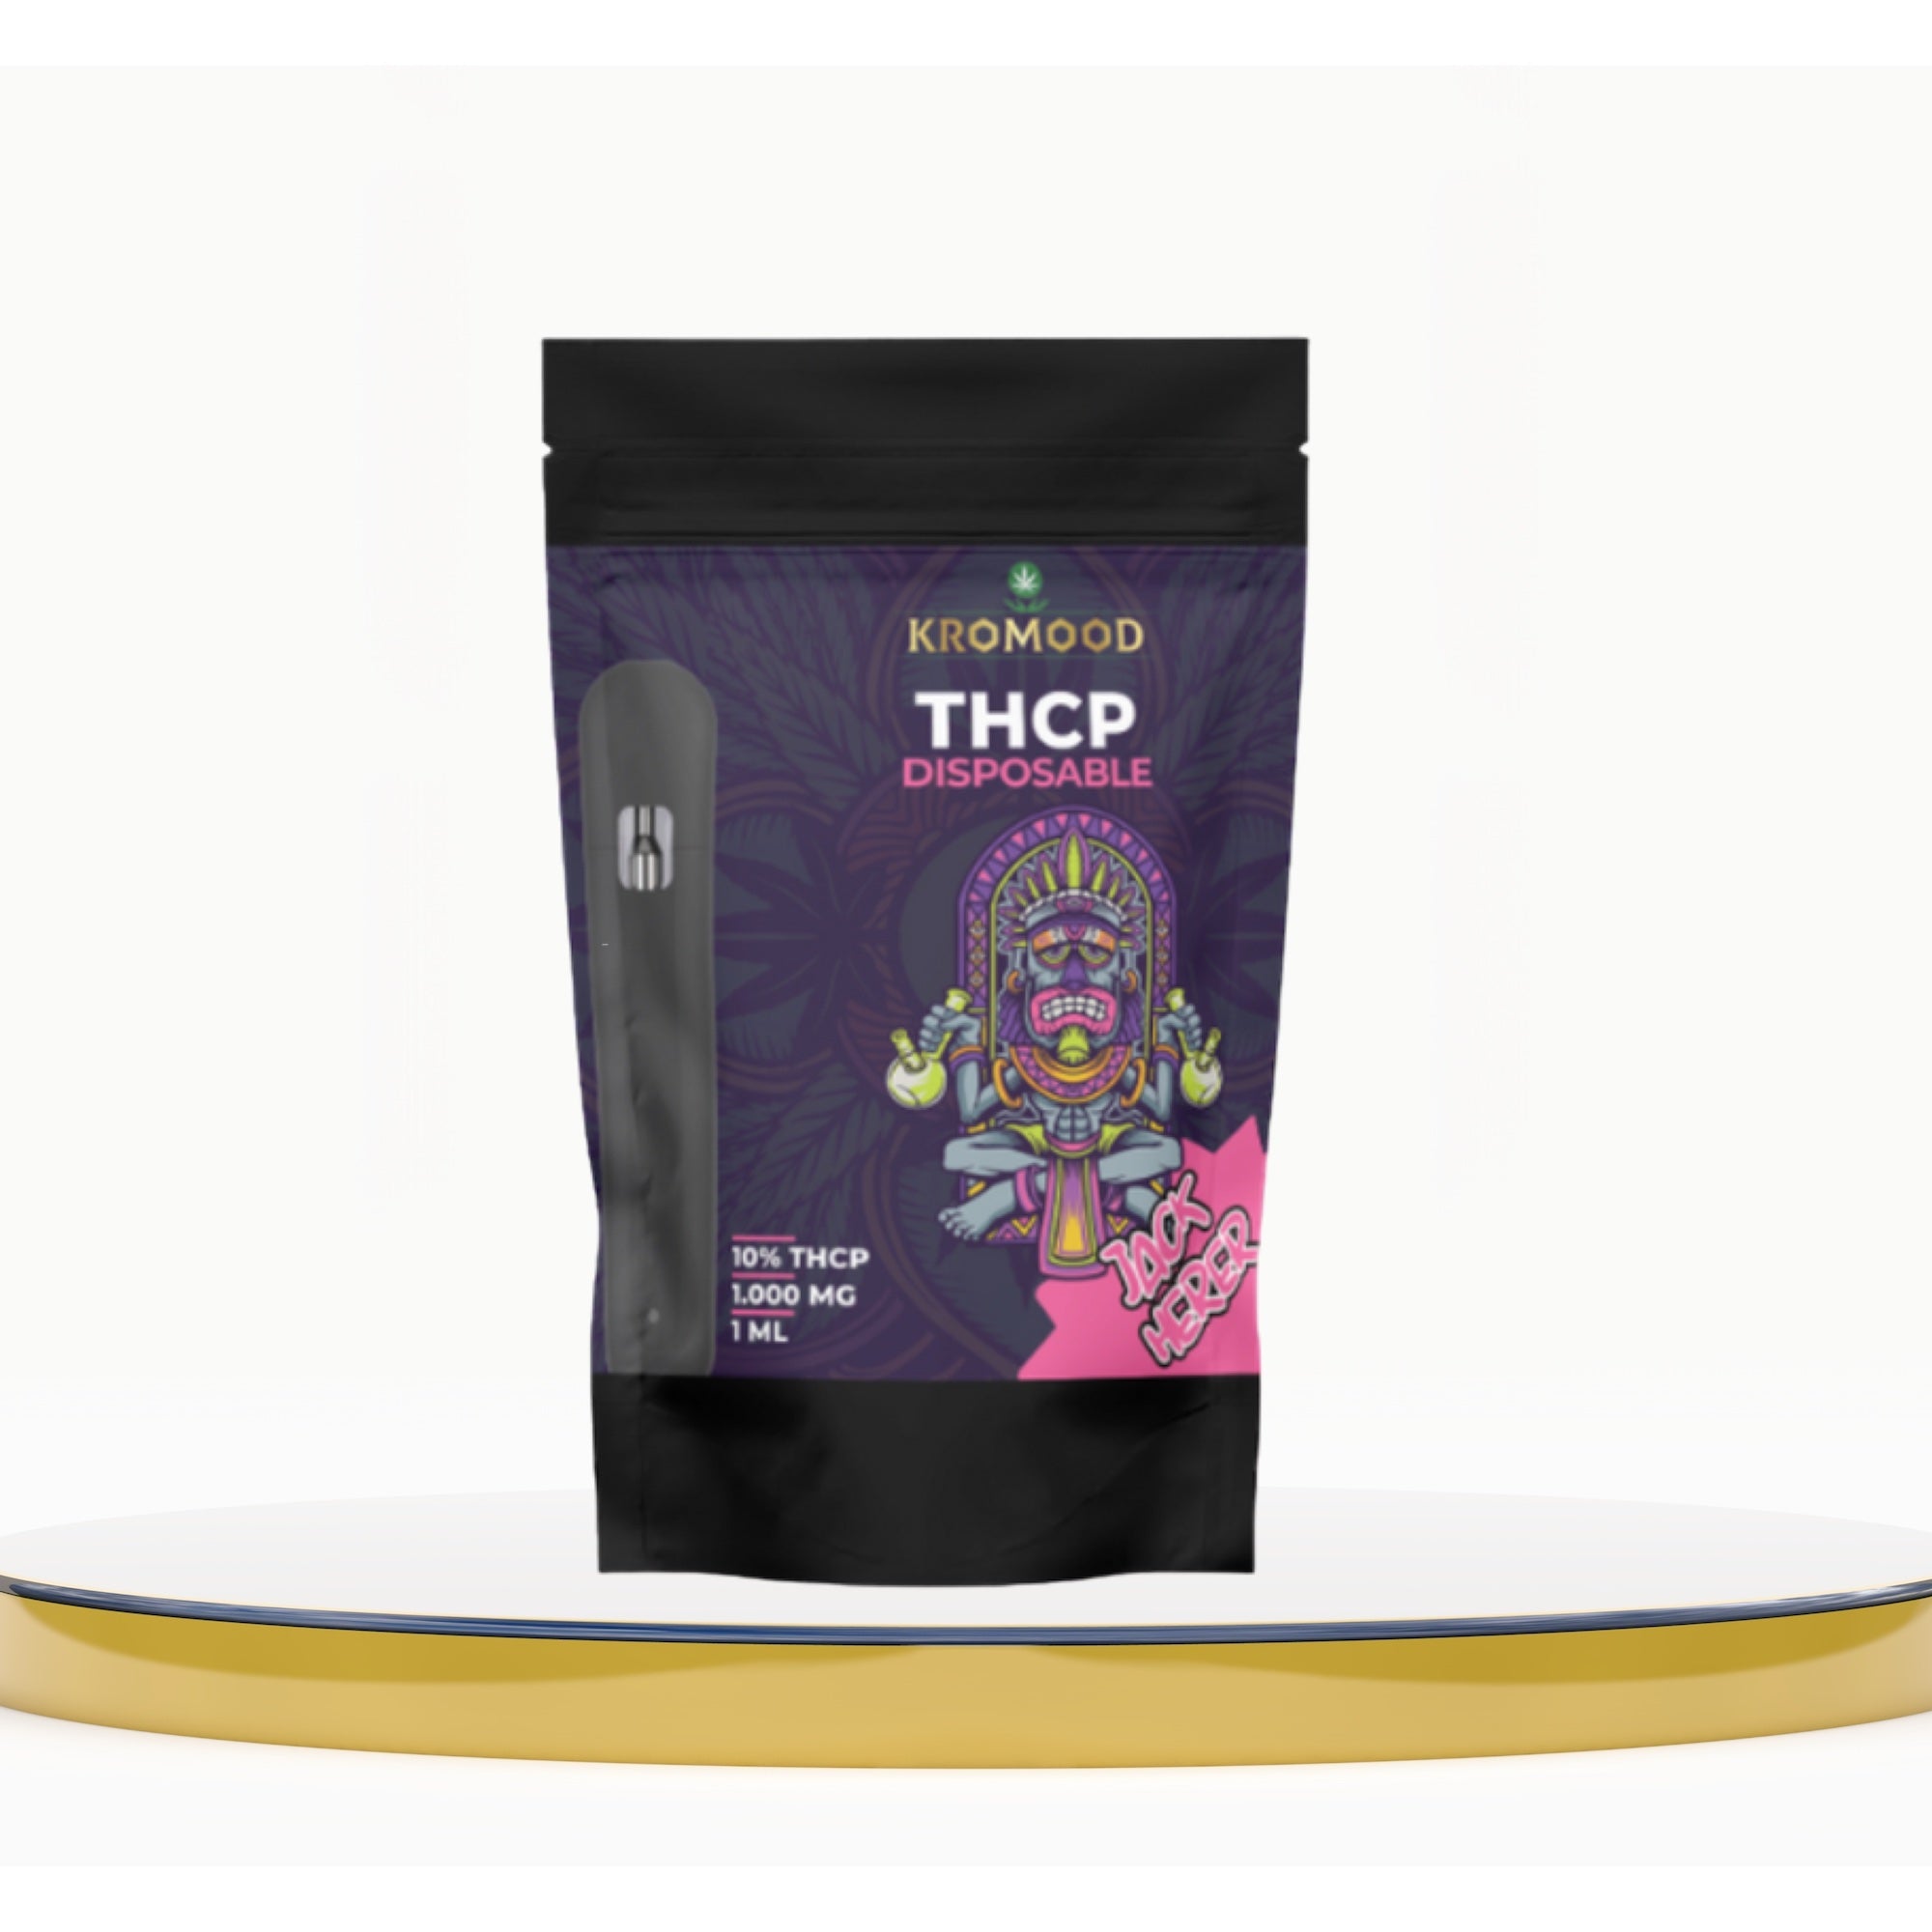 KroMood THCP Disposable Puff - Jack Herer: The Peak of Vaping, 10% THCP/1ML, 600 Puffs, CCELL Puff Technology 